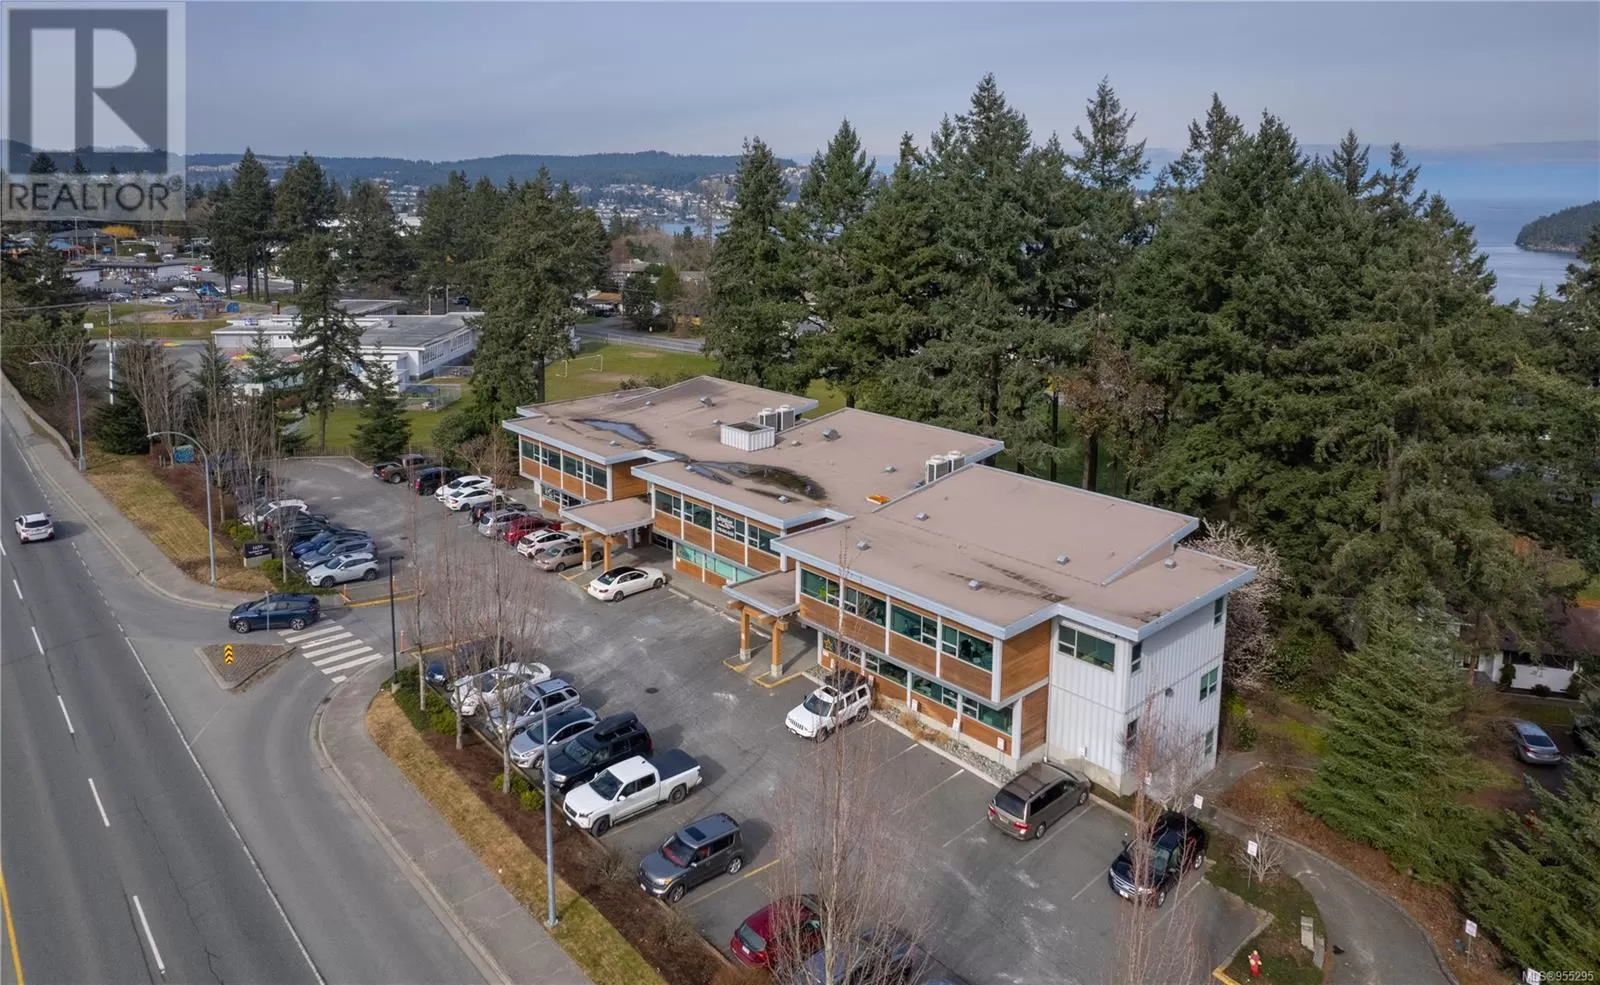 Offices for rent: 206 1650 Terminal Ave, Nanaimo, British Columbia V9S 0A3